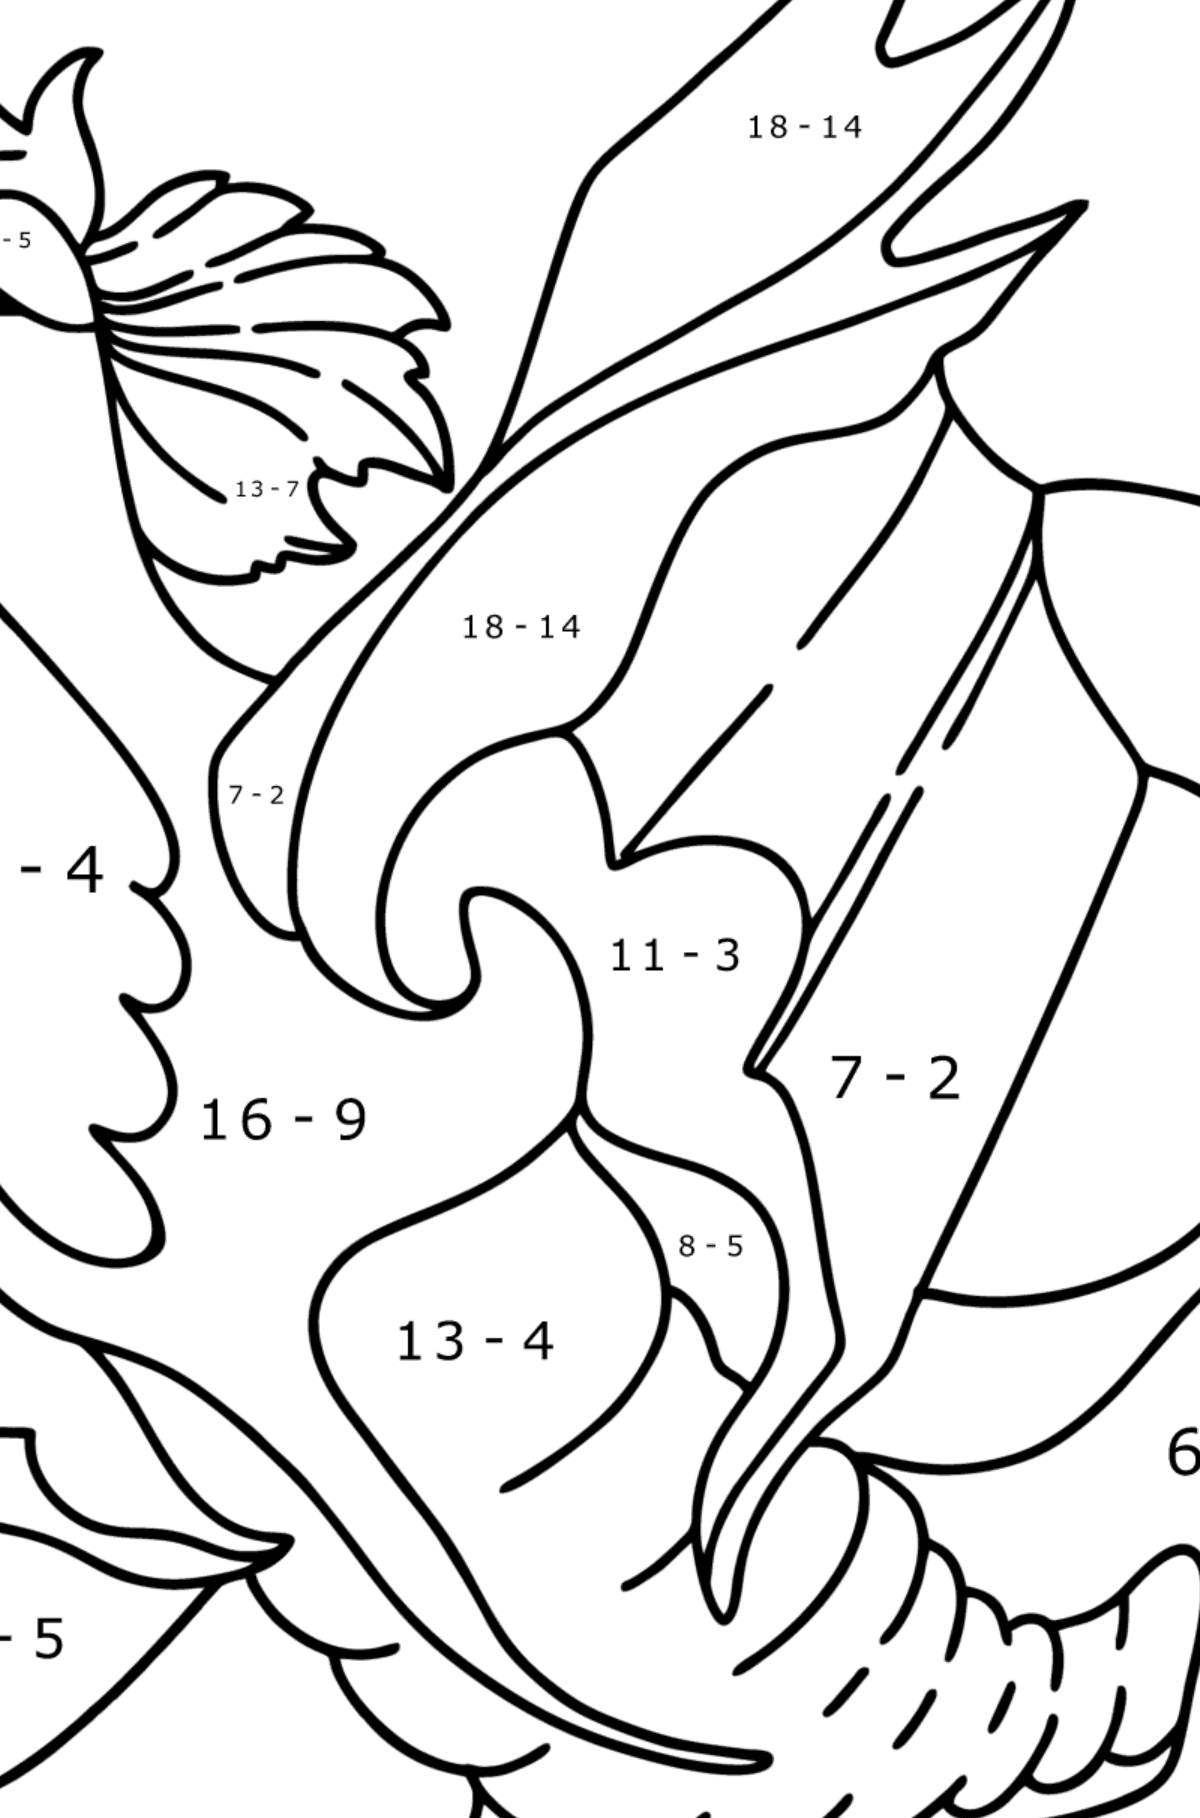 Lucky Dragon coloring page - Math Coloring - Subtraction for Kids